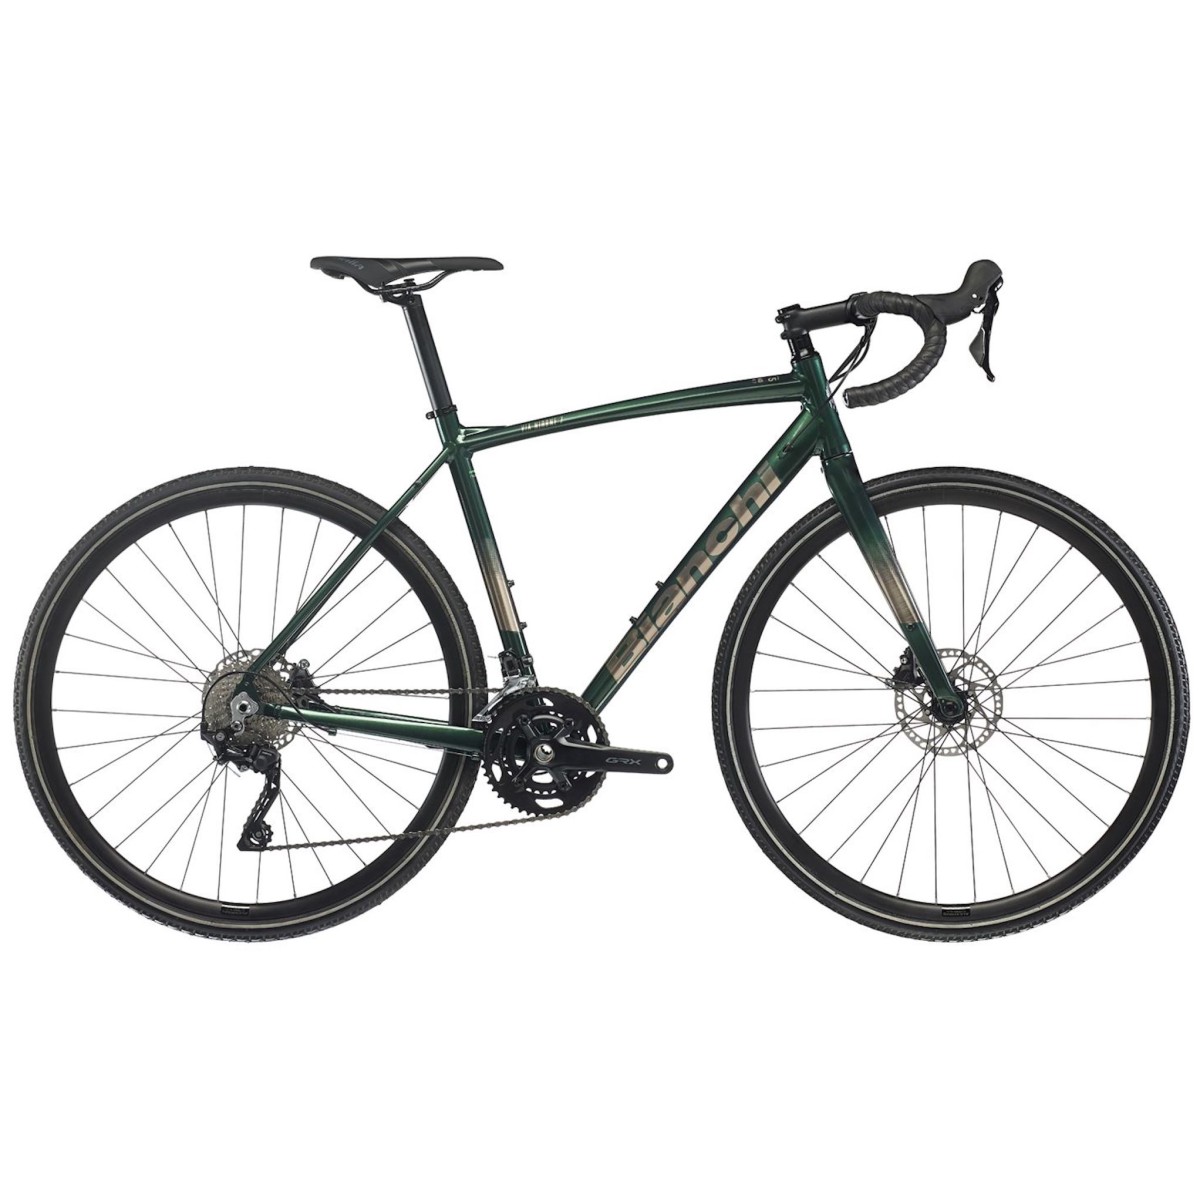 BIANCHI VIA NIRONE 7 ALLROAD gravel bicycle - green forest/bronze - 2023